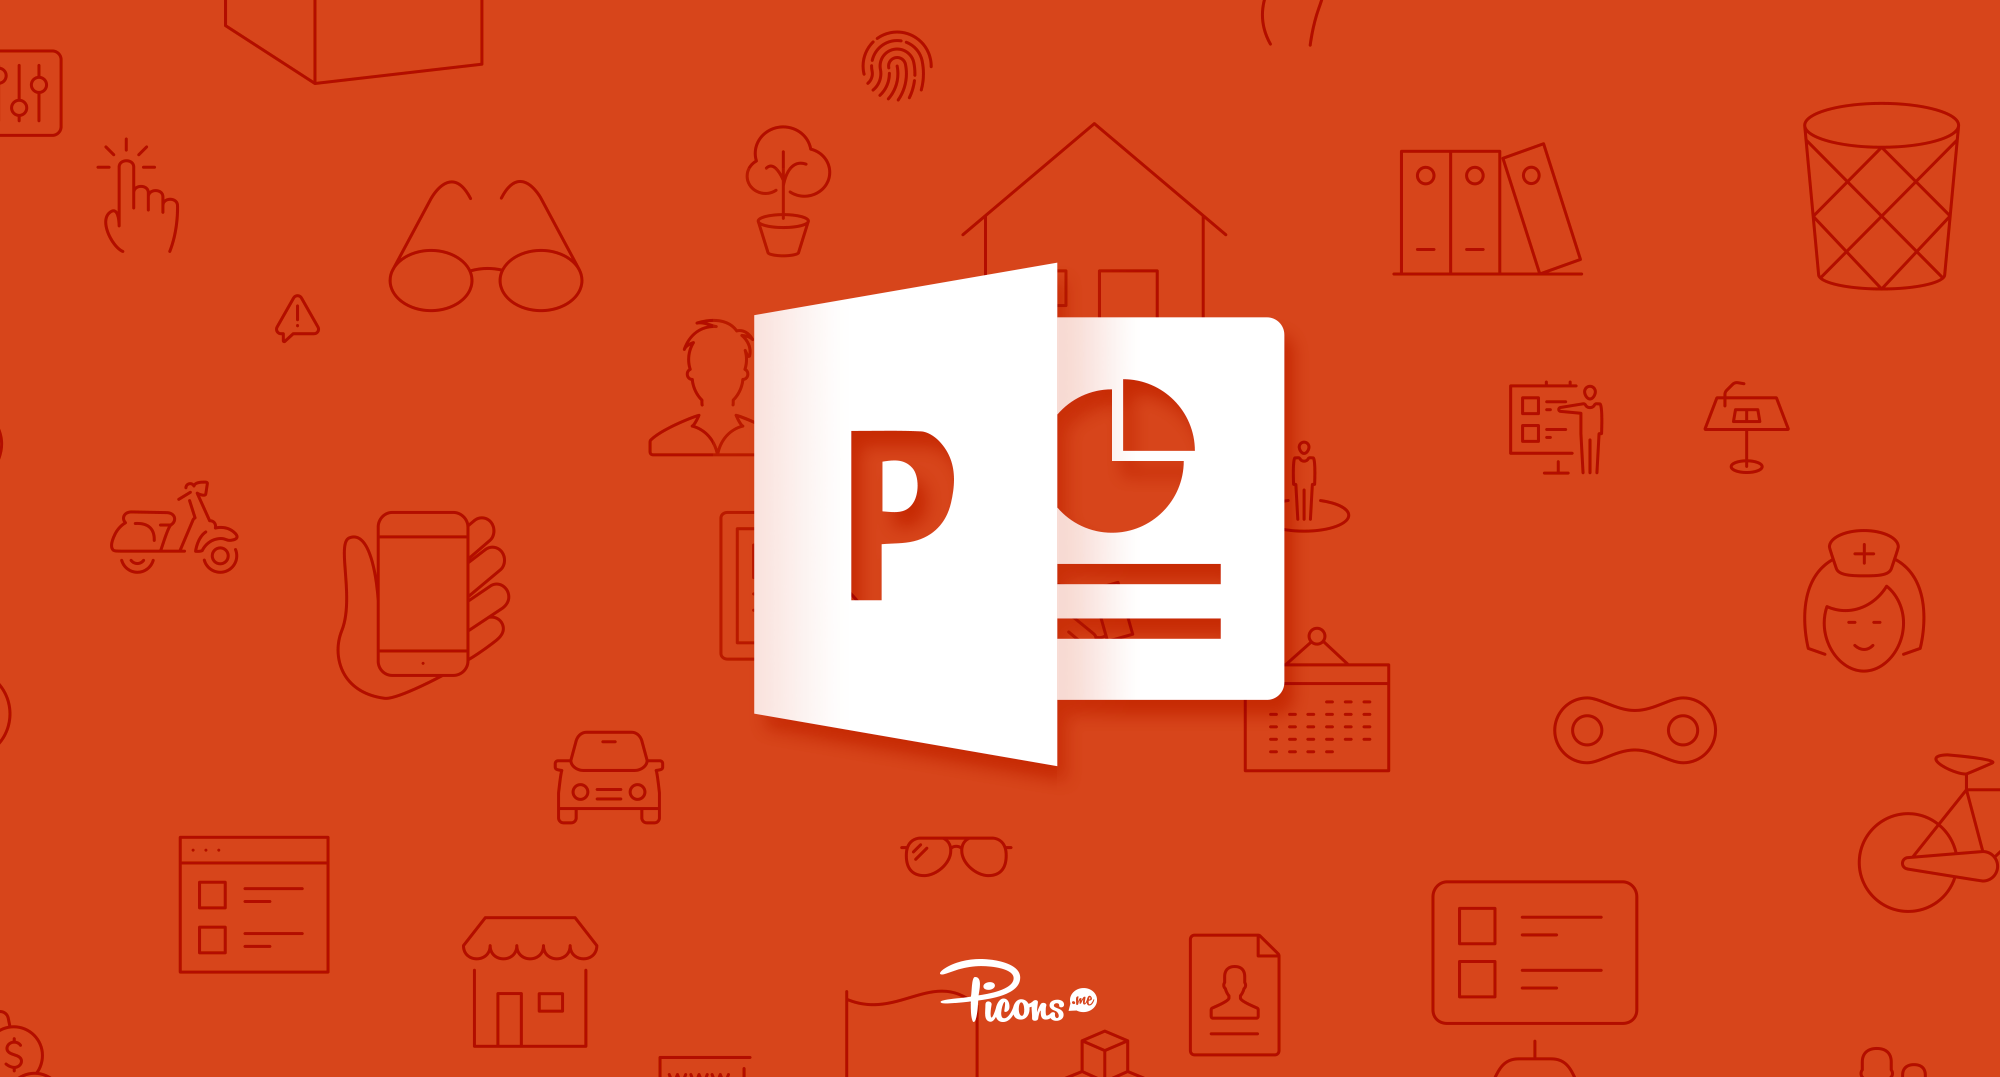 Using Picons vector icons in Powerpoint